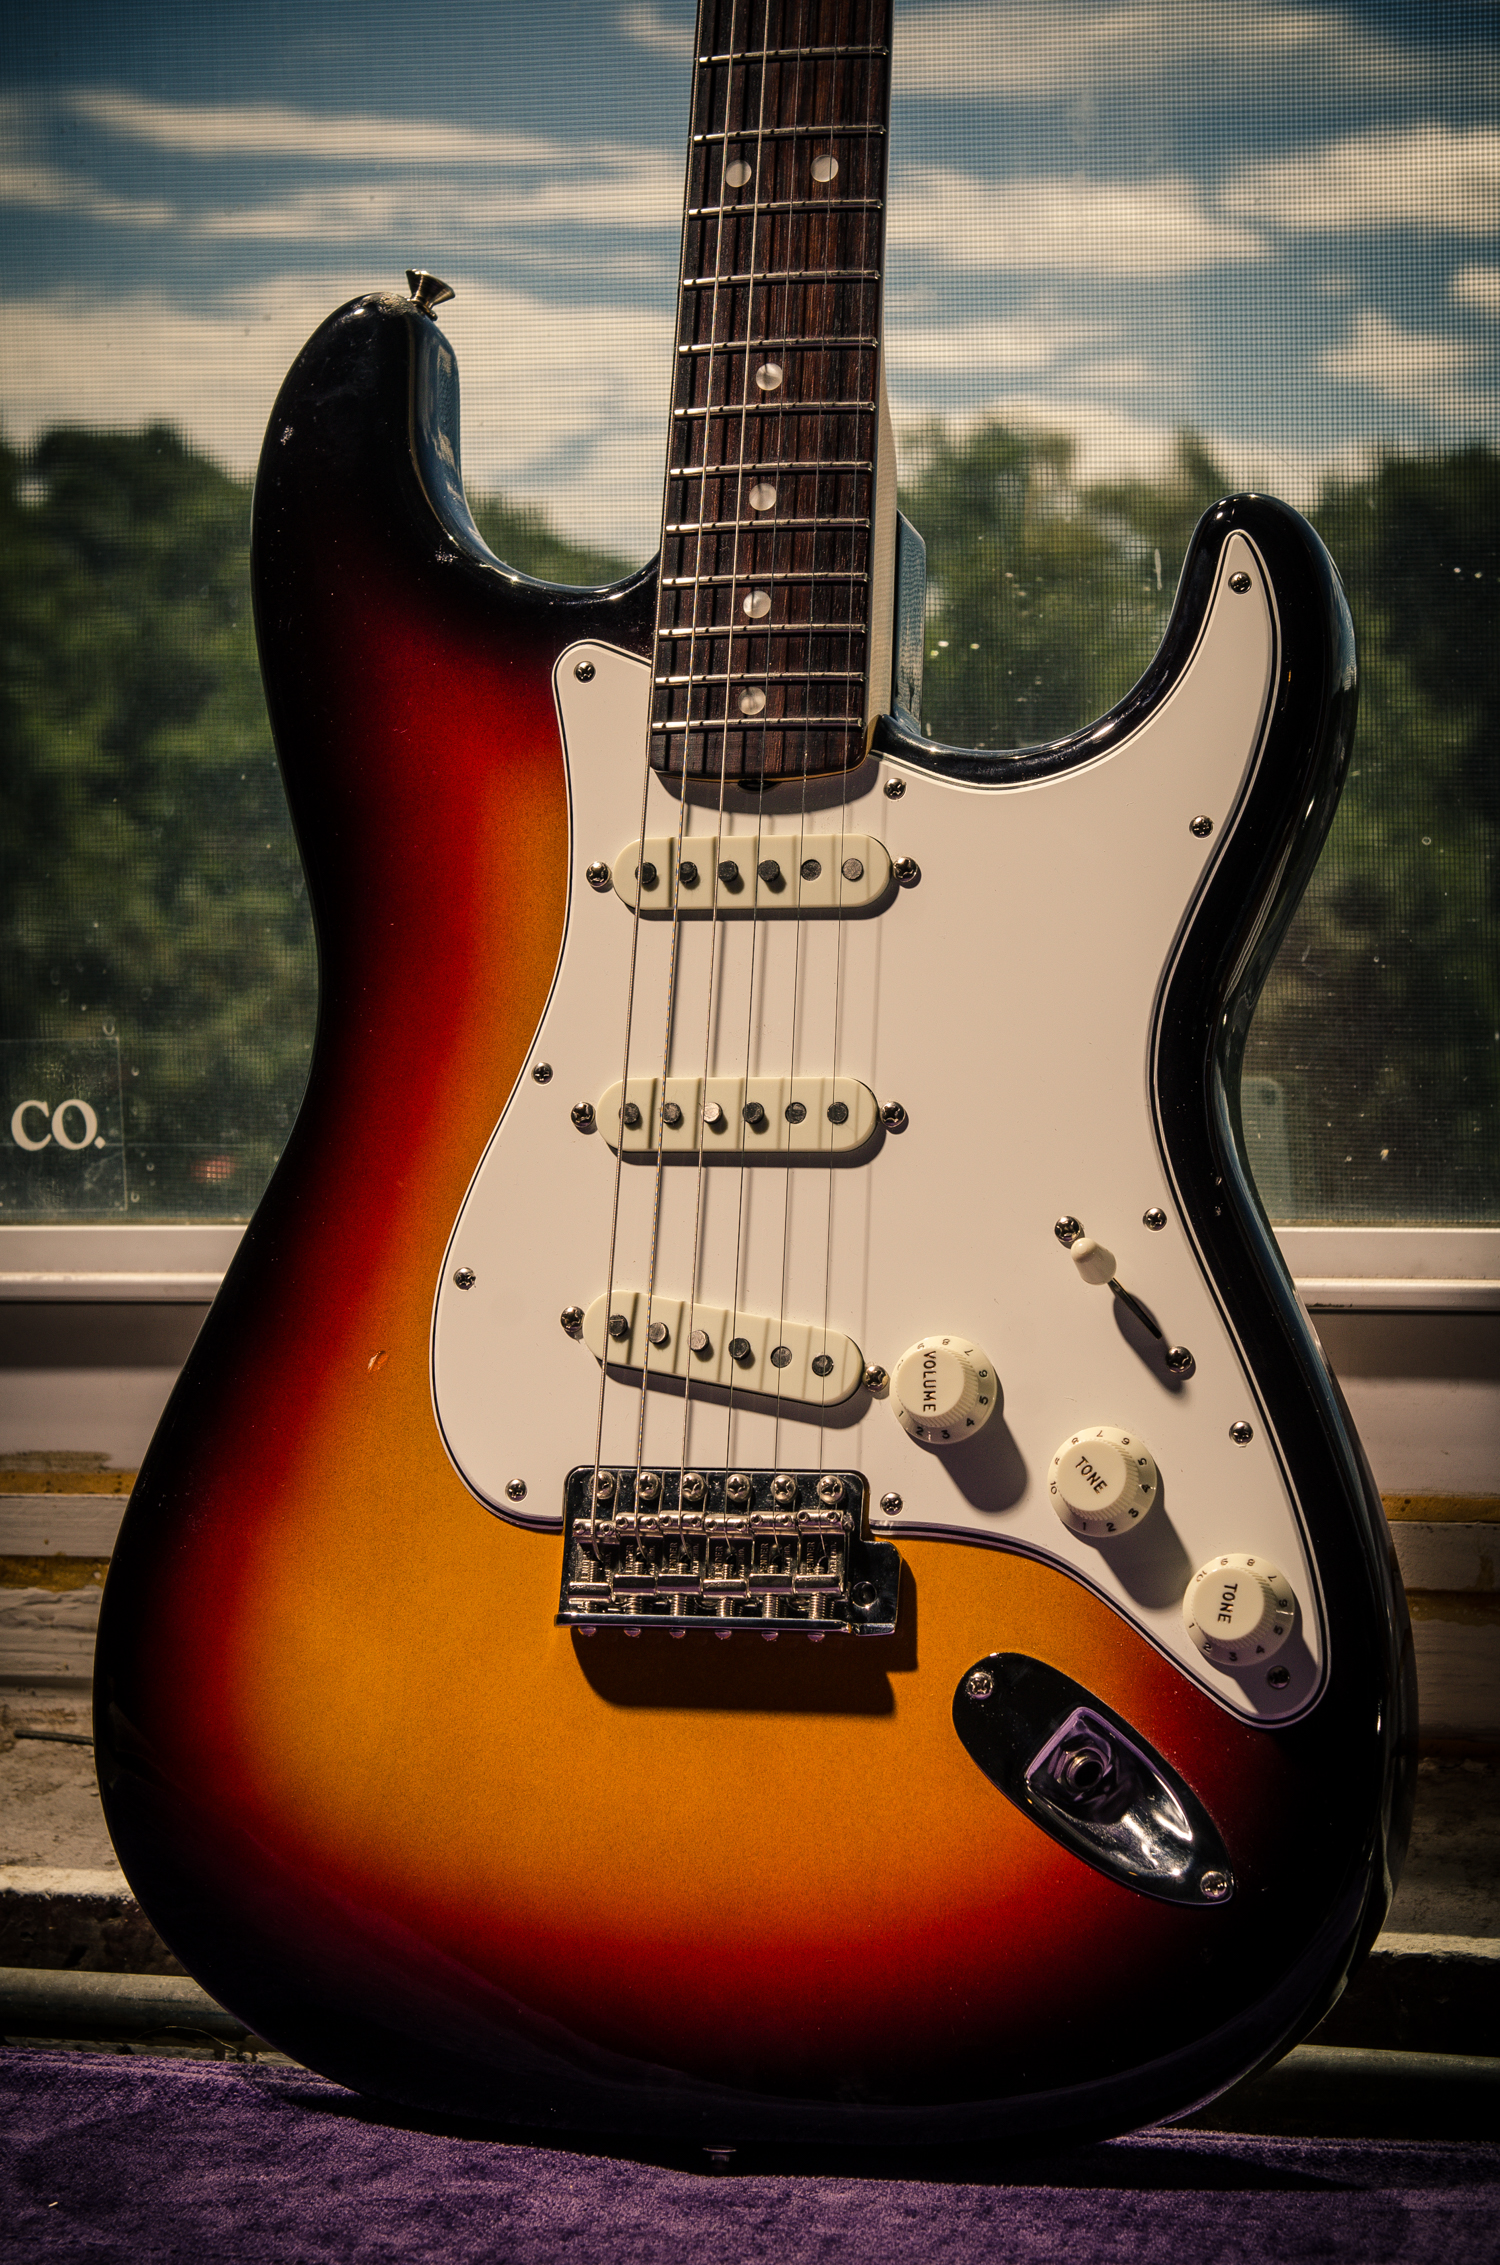 etisk Fremme Microbe 2014 Fender American Vintage '65 Stratocaster [7.9 lbs] :: setup — Chubbuck  Guitars :: making & repairing Guitars in a old building just north of  Boston, Mass.